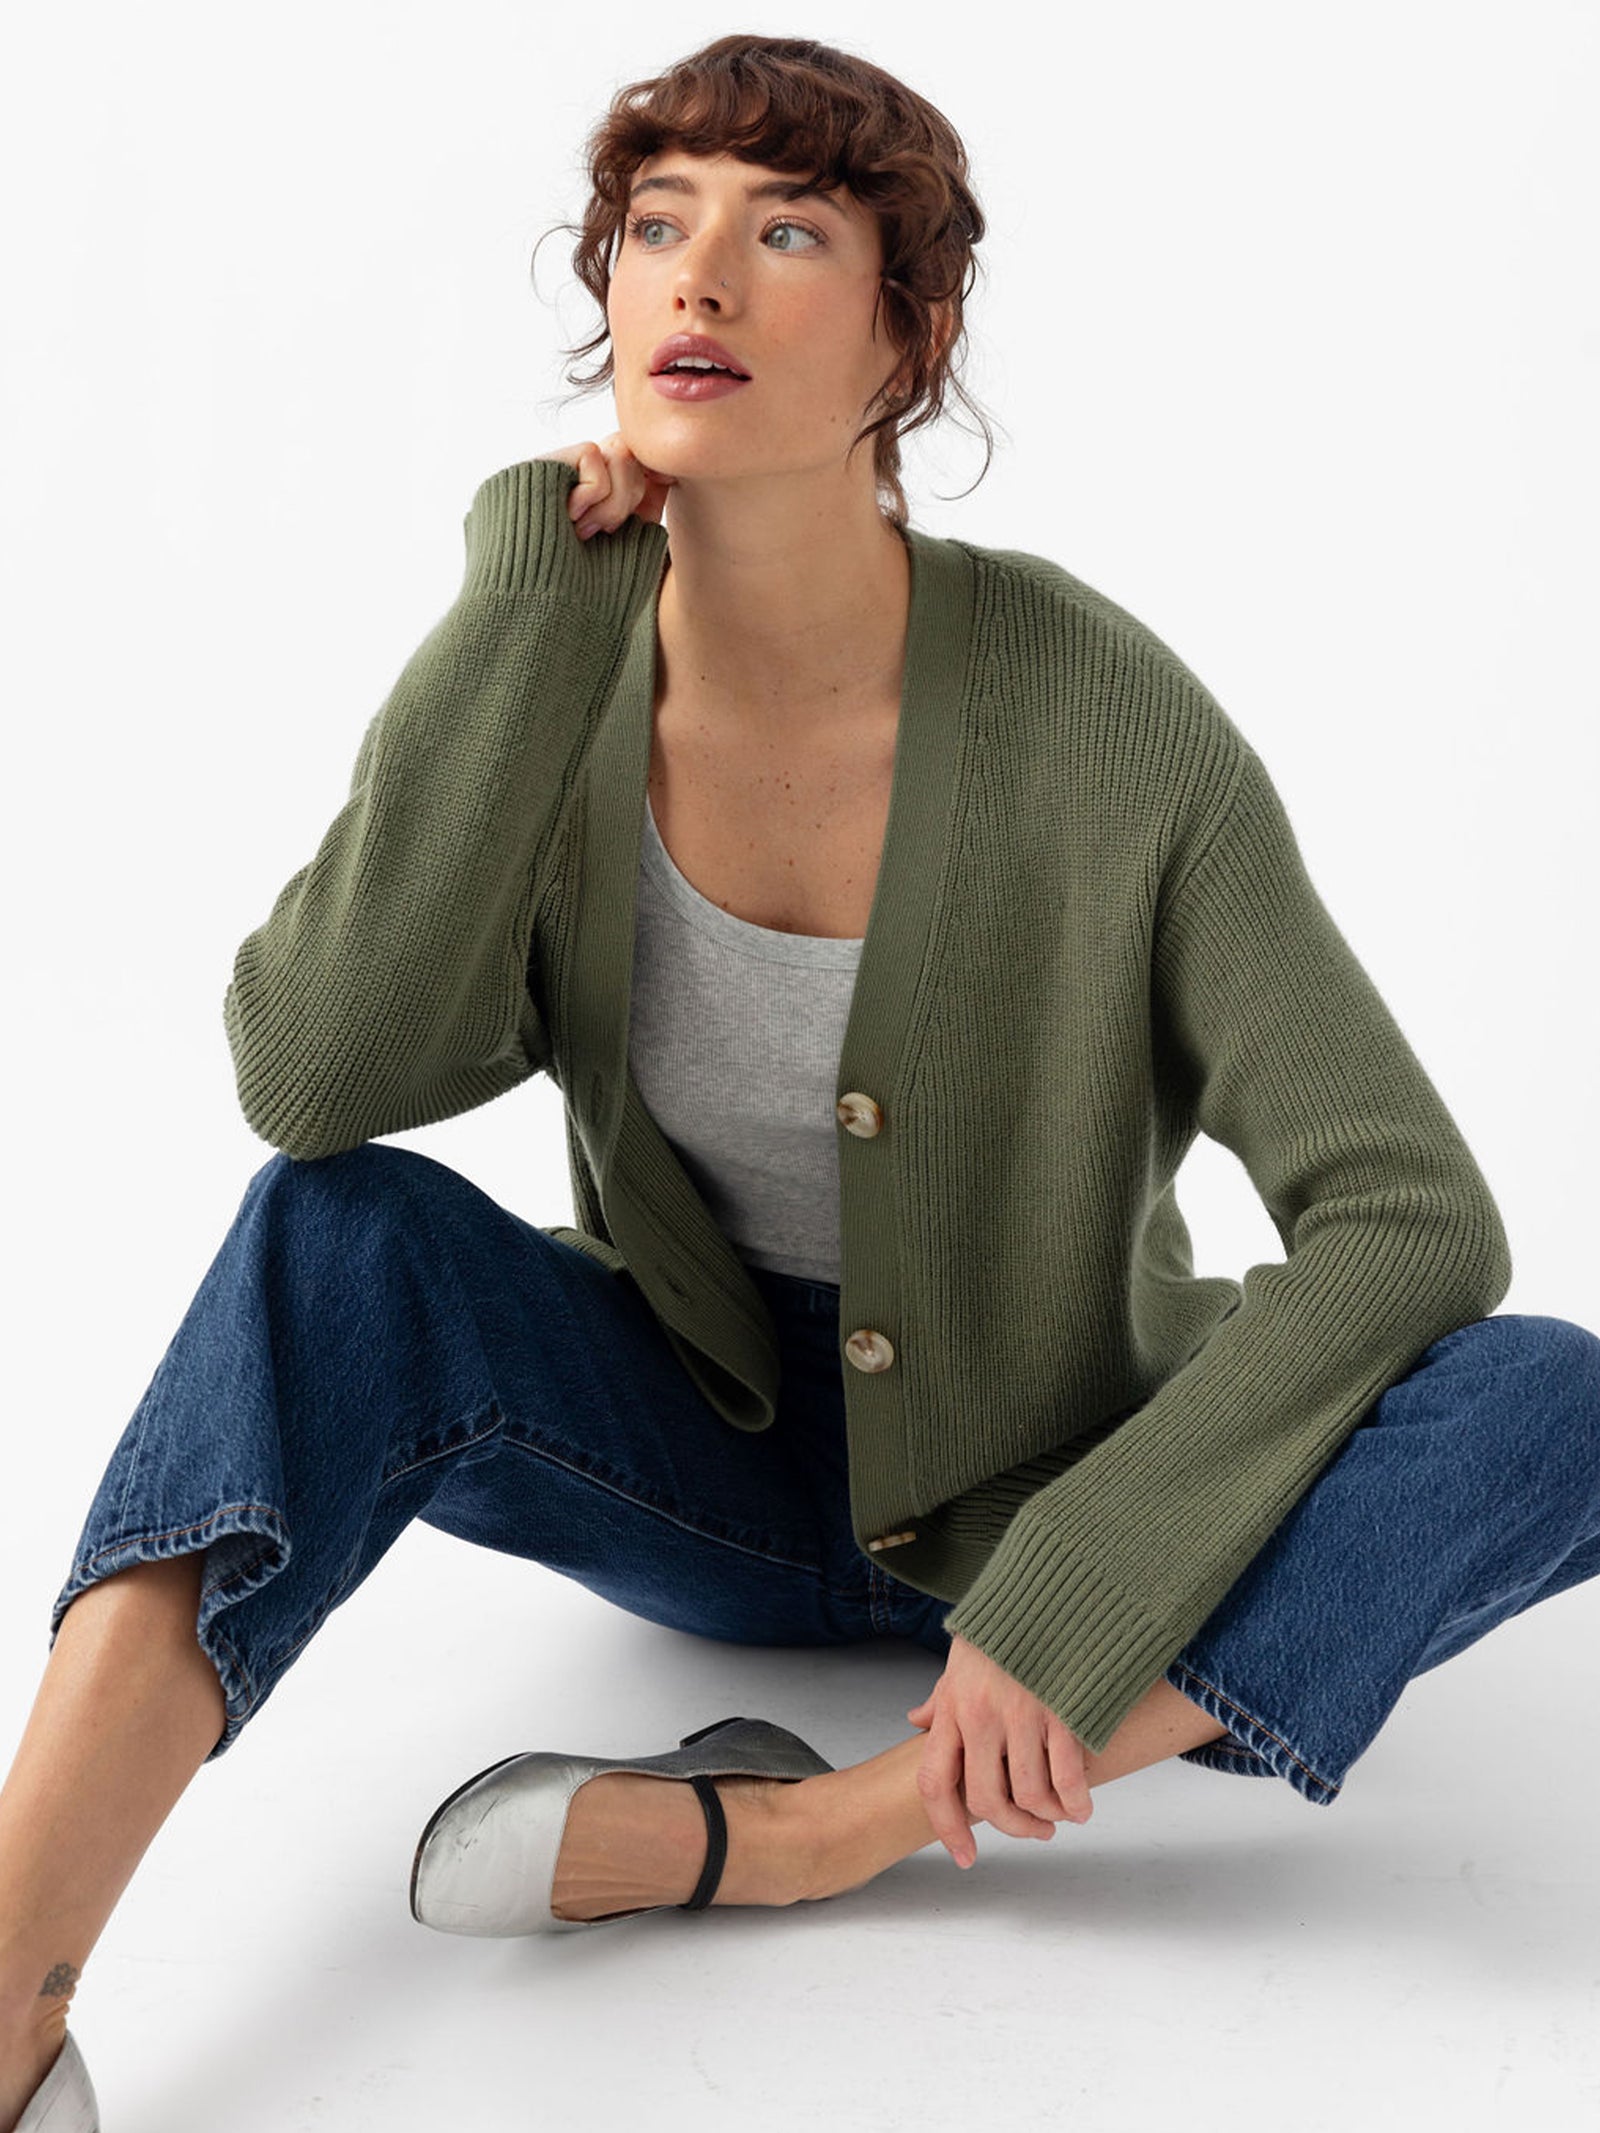 Woman sitting on floor in jeans and juniper cardigan 